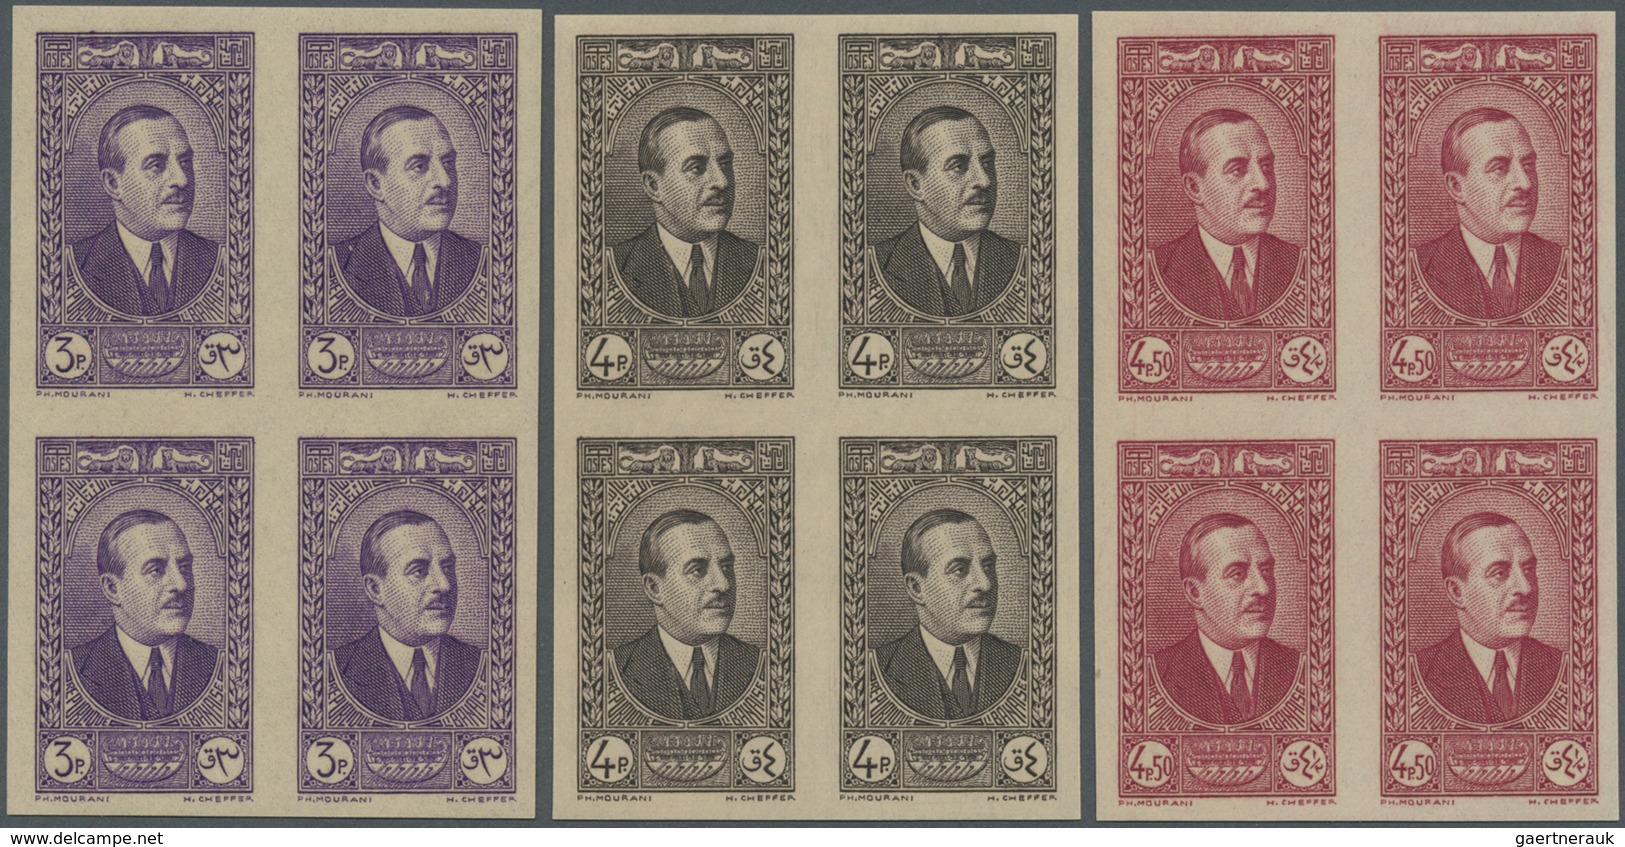 ** Libanon: 1937/1940, Definitives 0.10pi. to 100pi., 16 values complete (excl. 7.50pi.), IMPERFORATE b